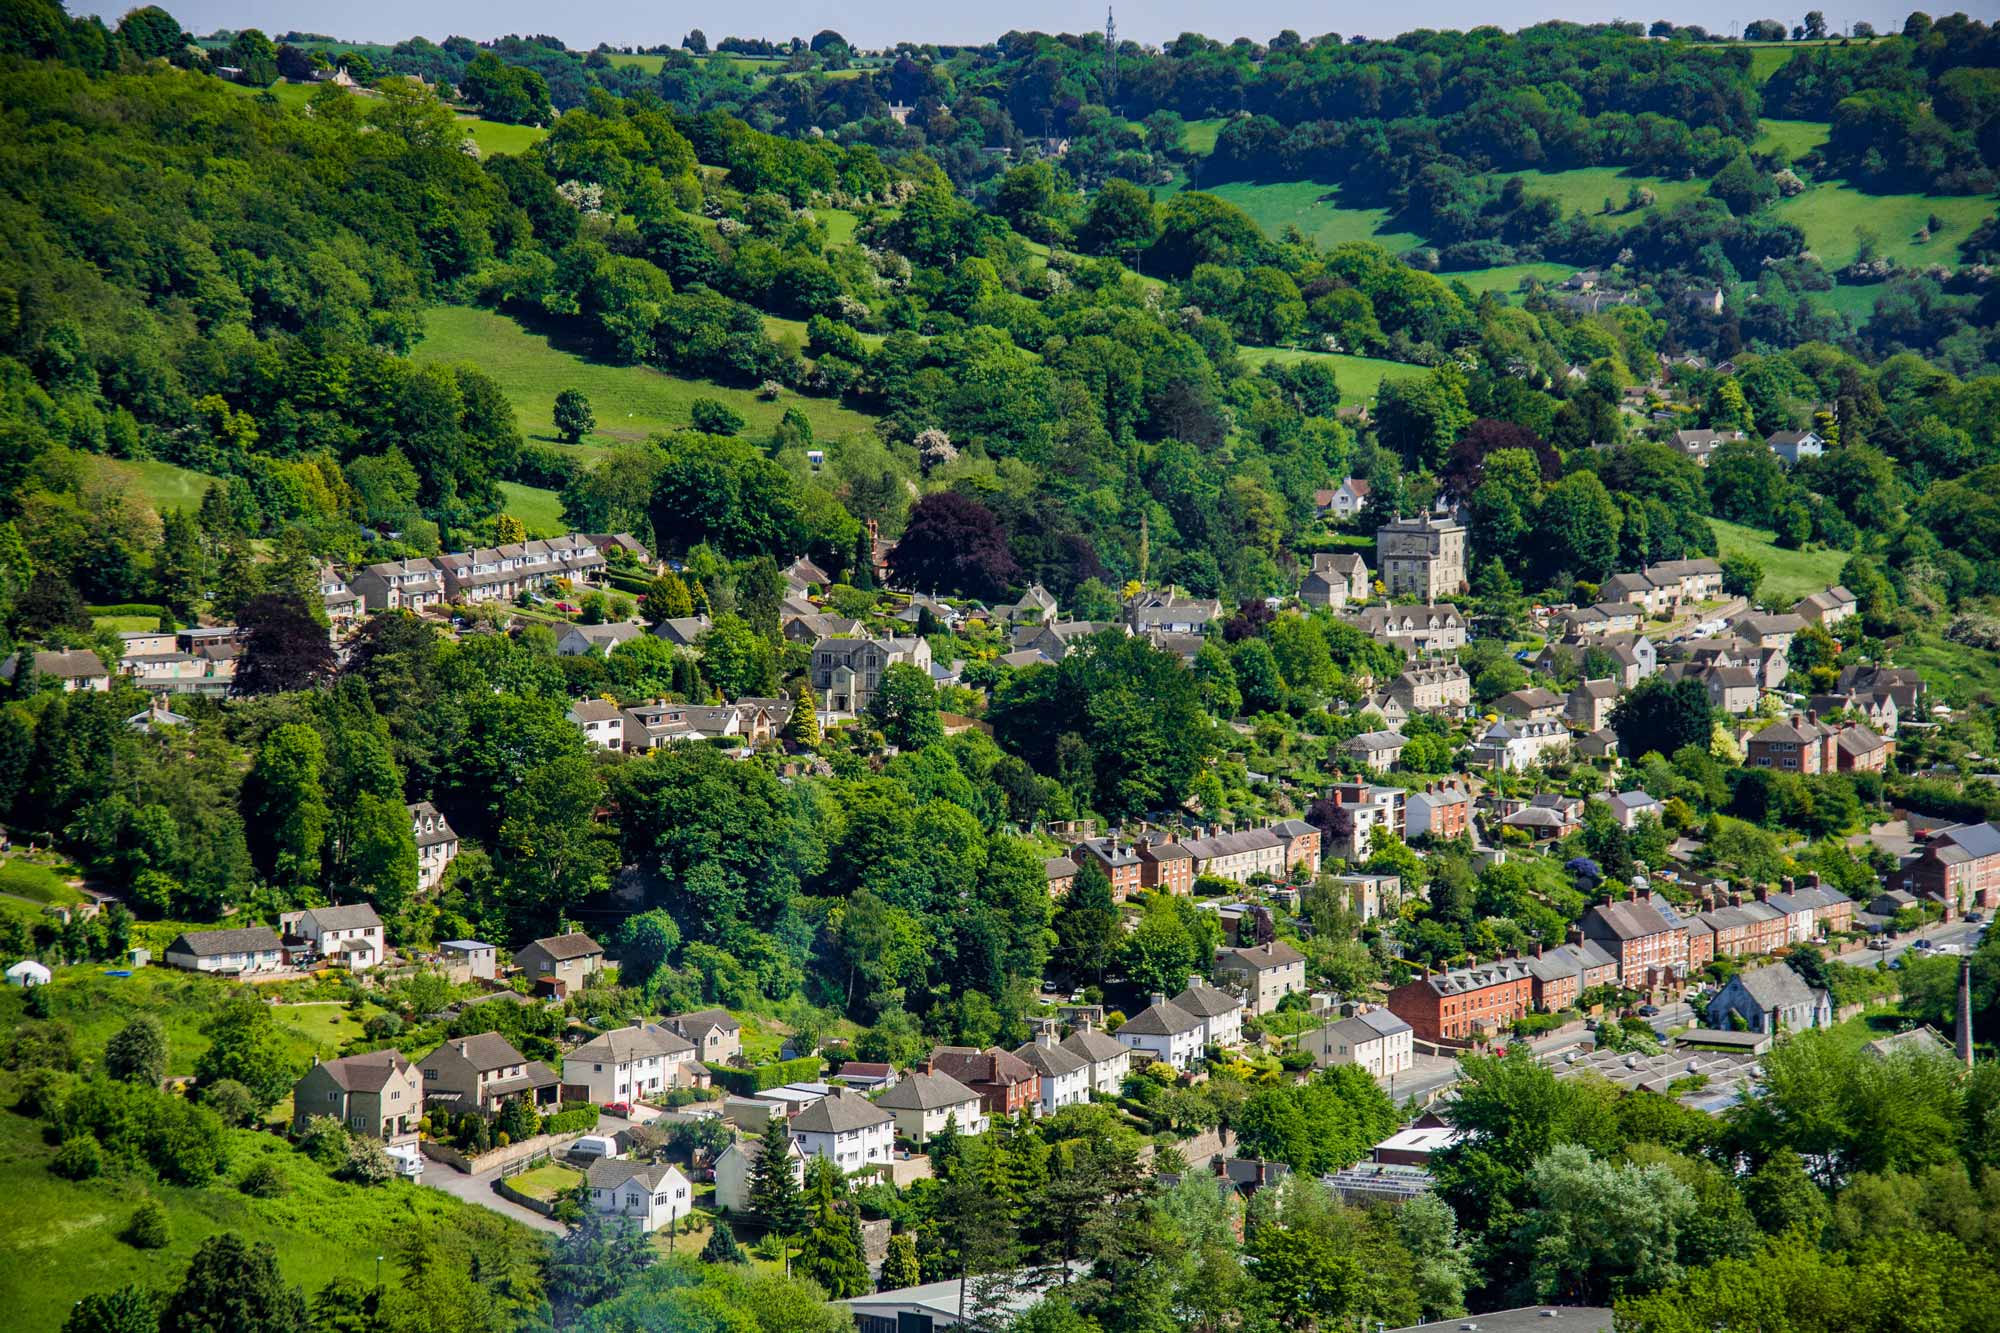 Stroud from Above